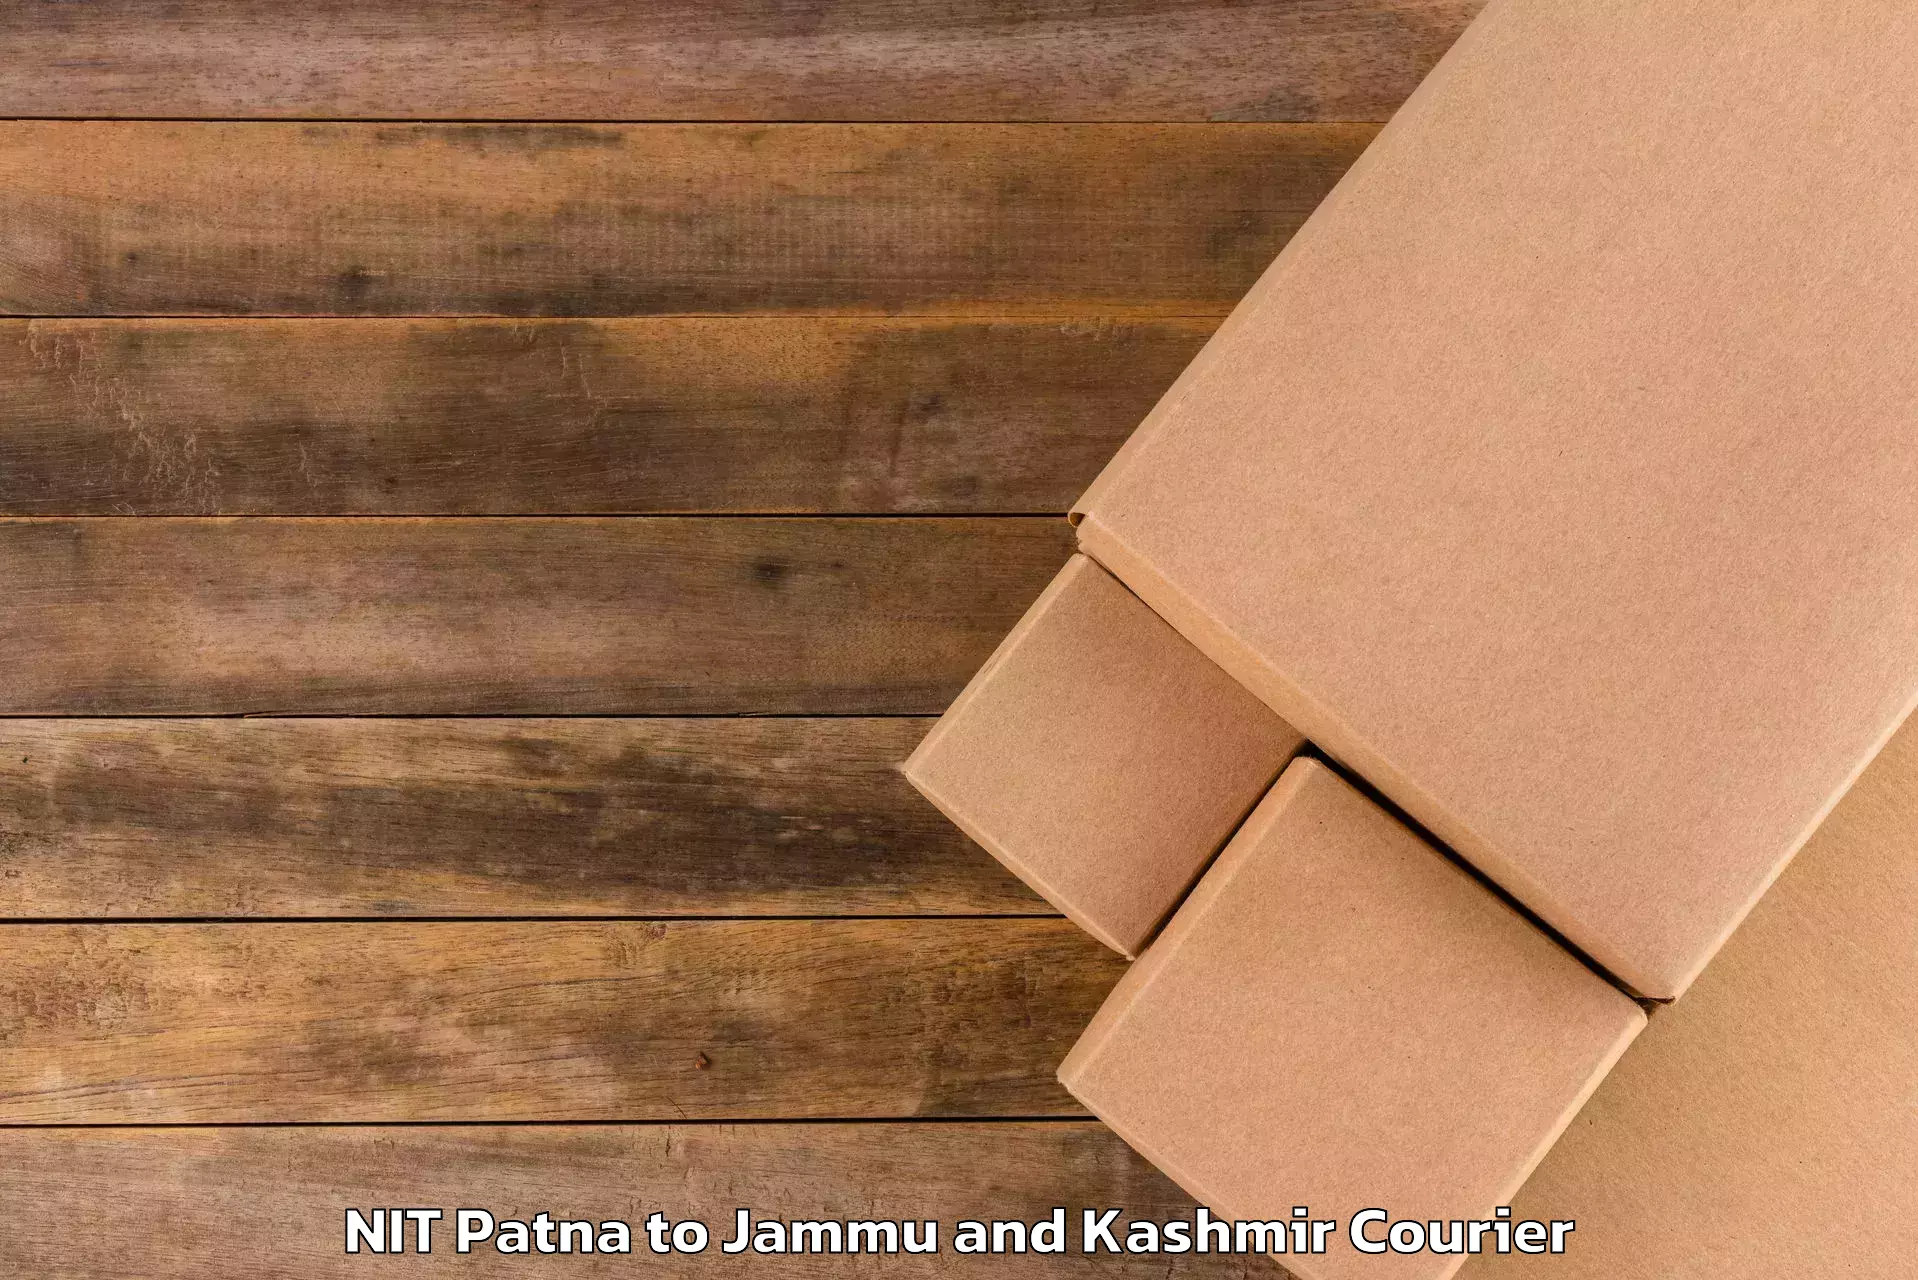 Luggage delivery app NIT Patna to Udhampur